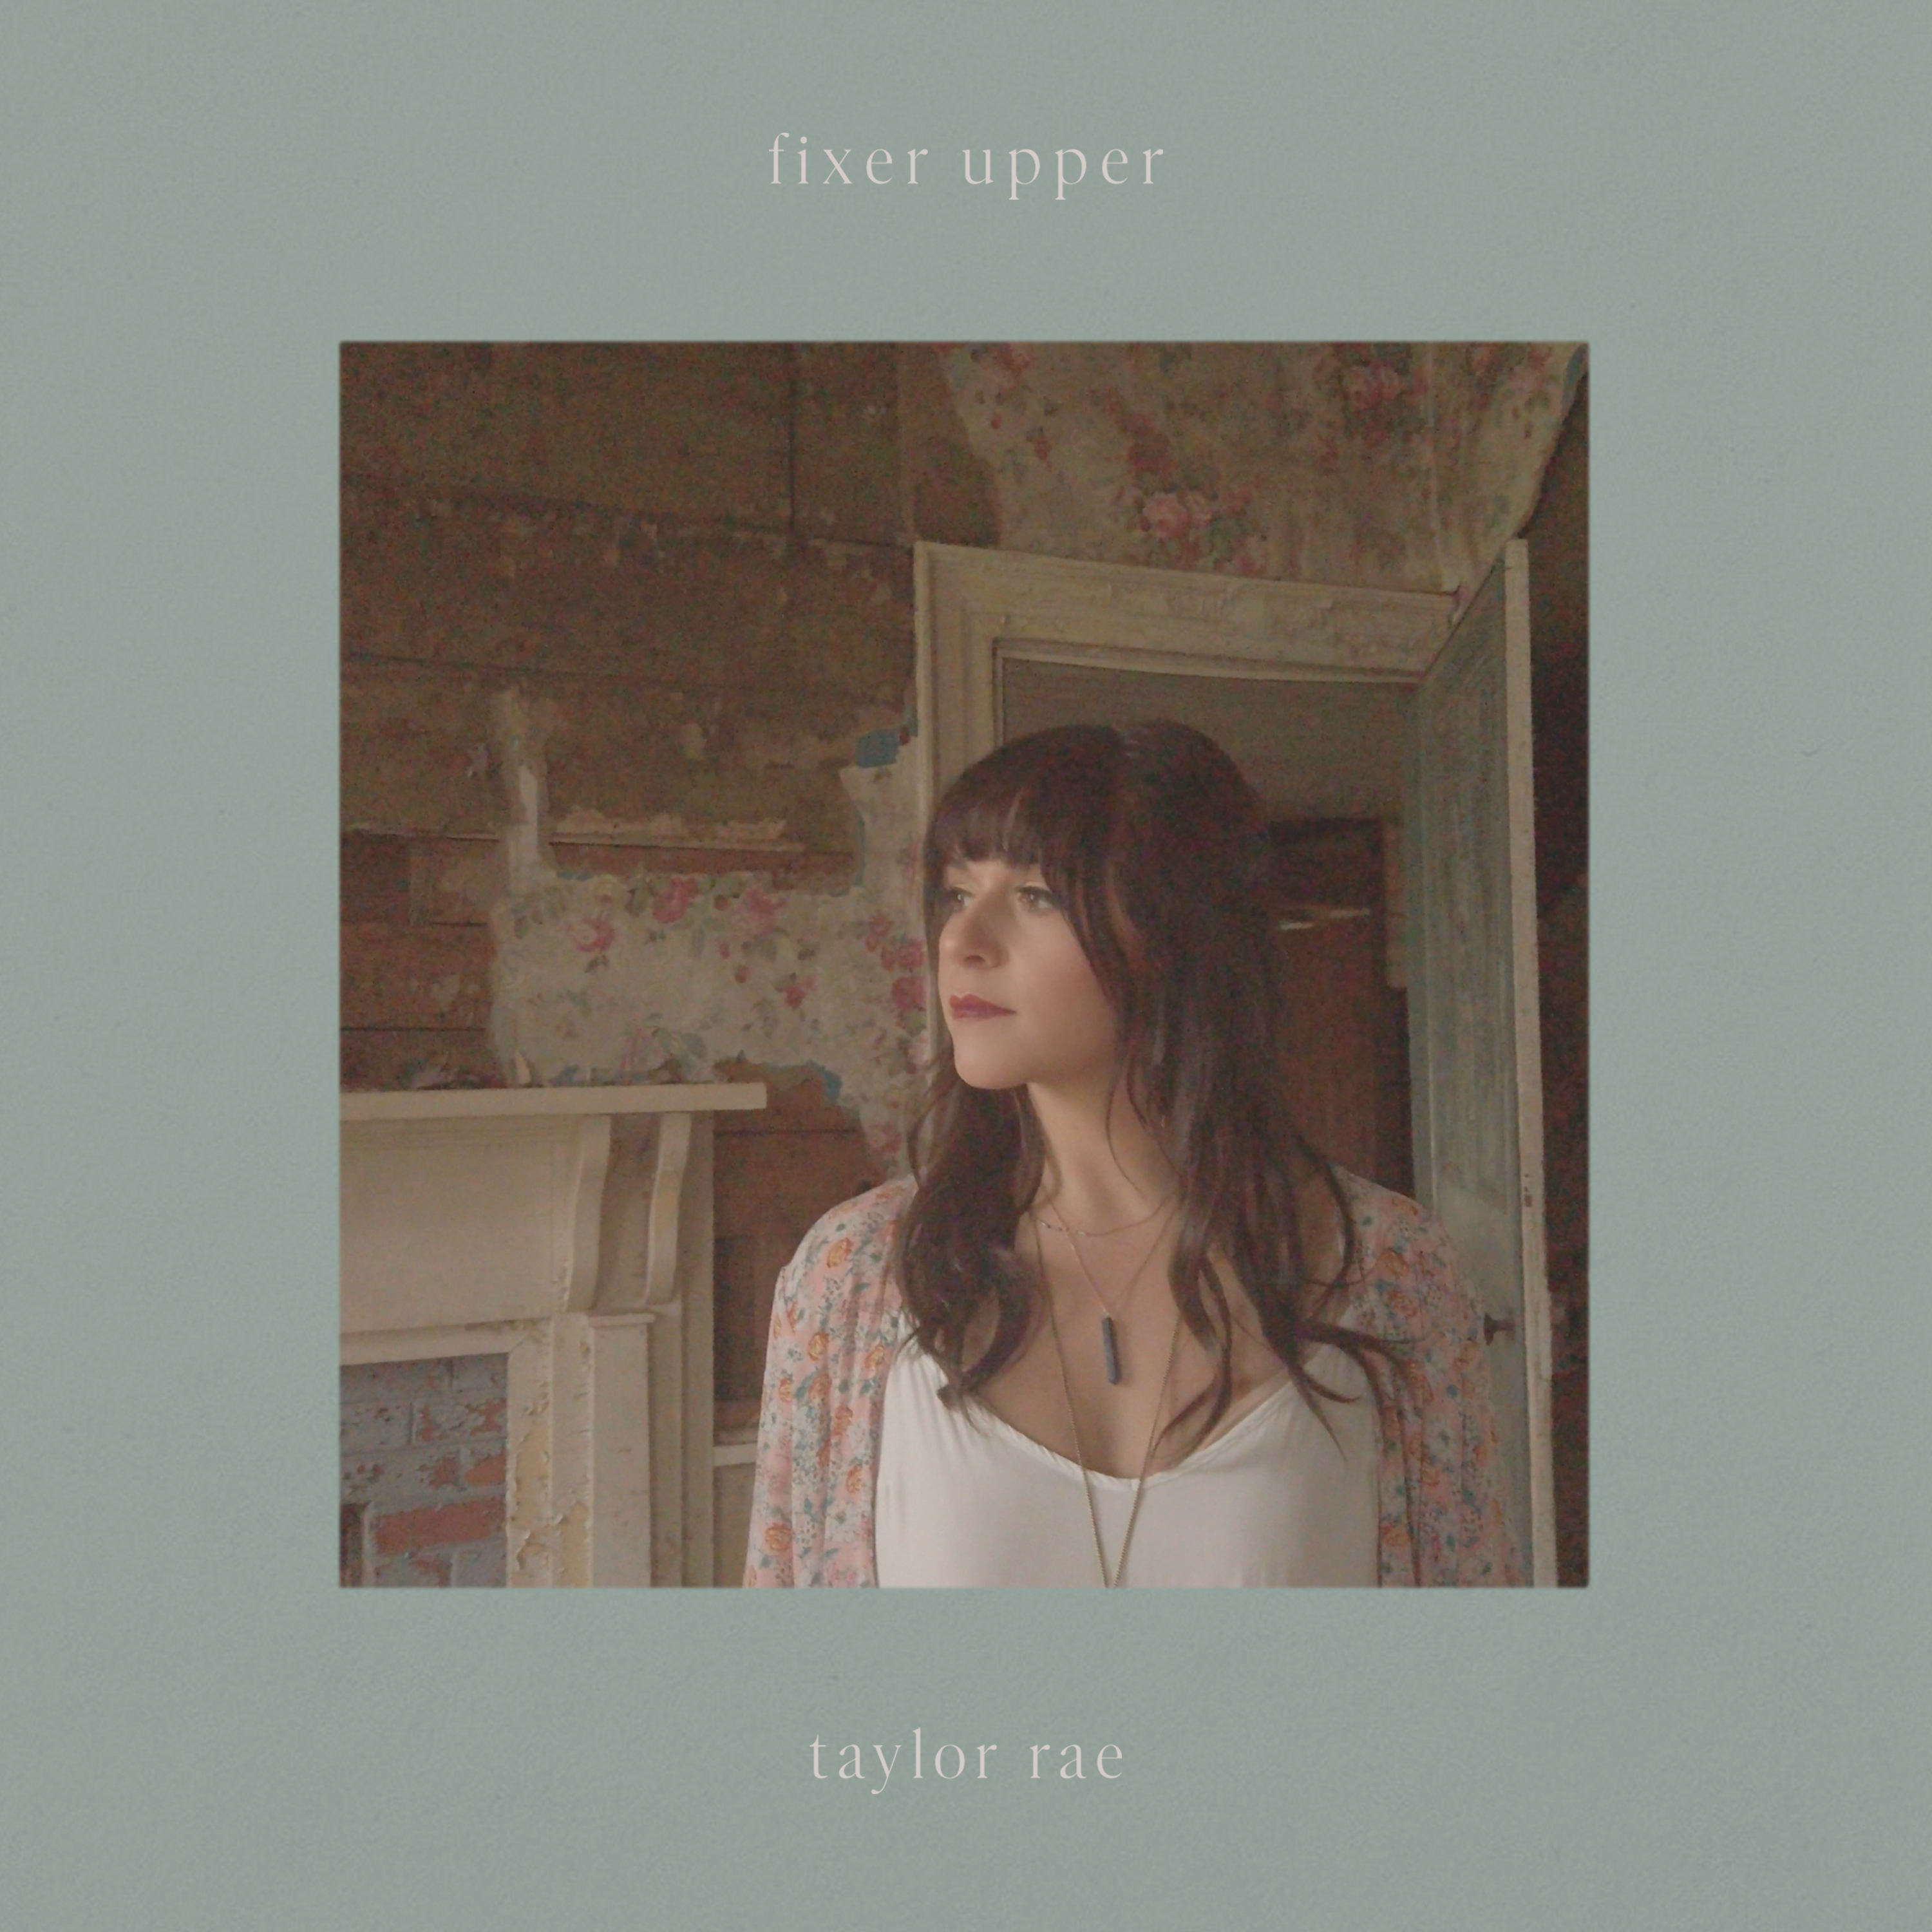 Taylor Rae Bares Heart & Soul With Introspective Debut Single, “Fixer Upper”